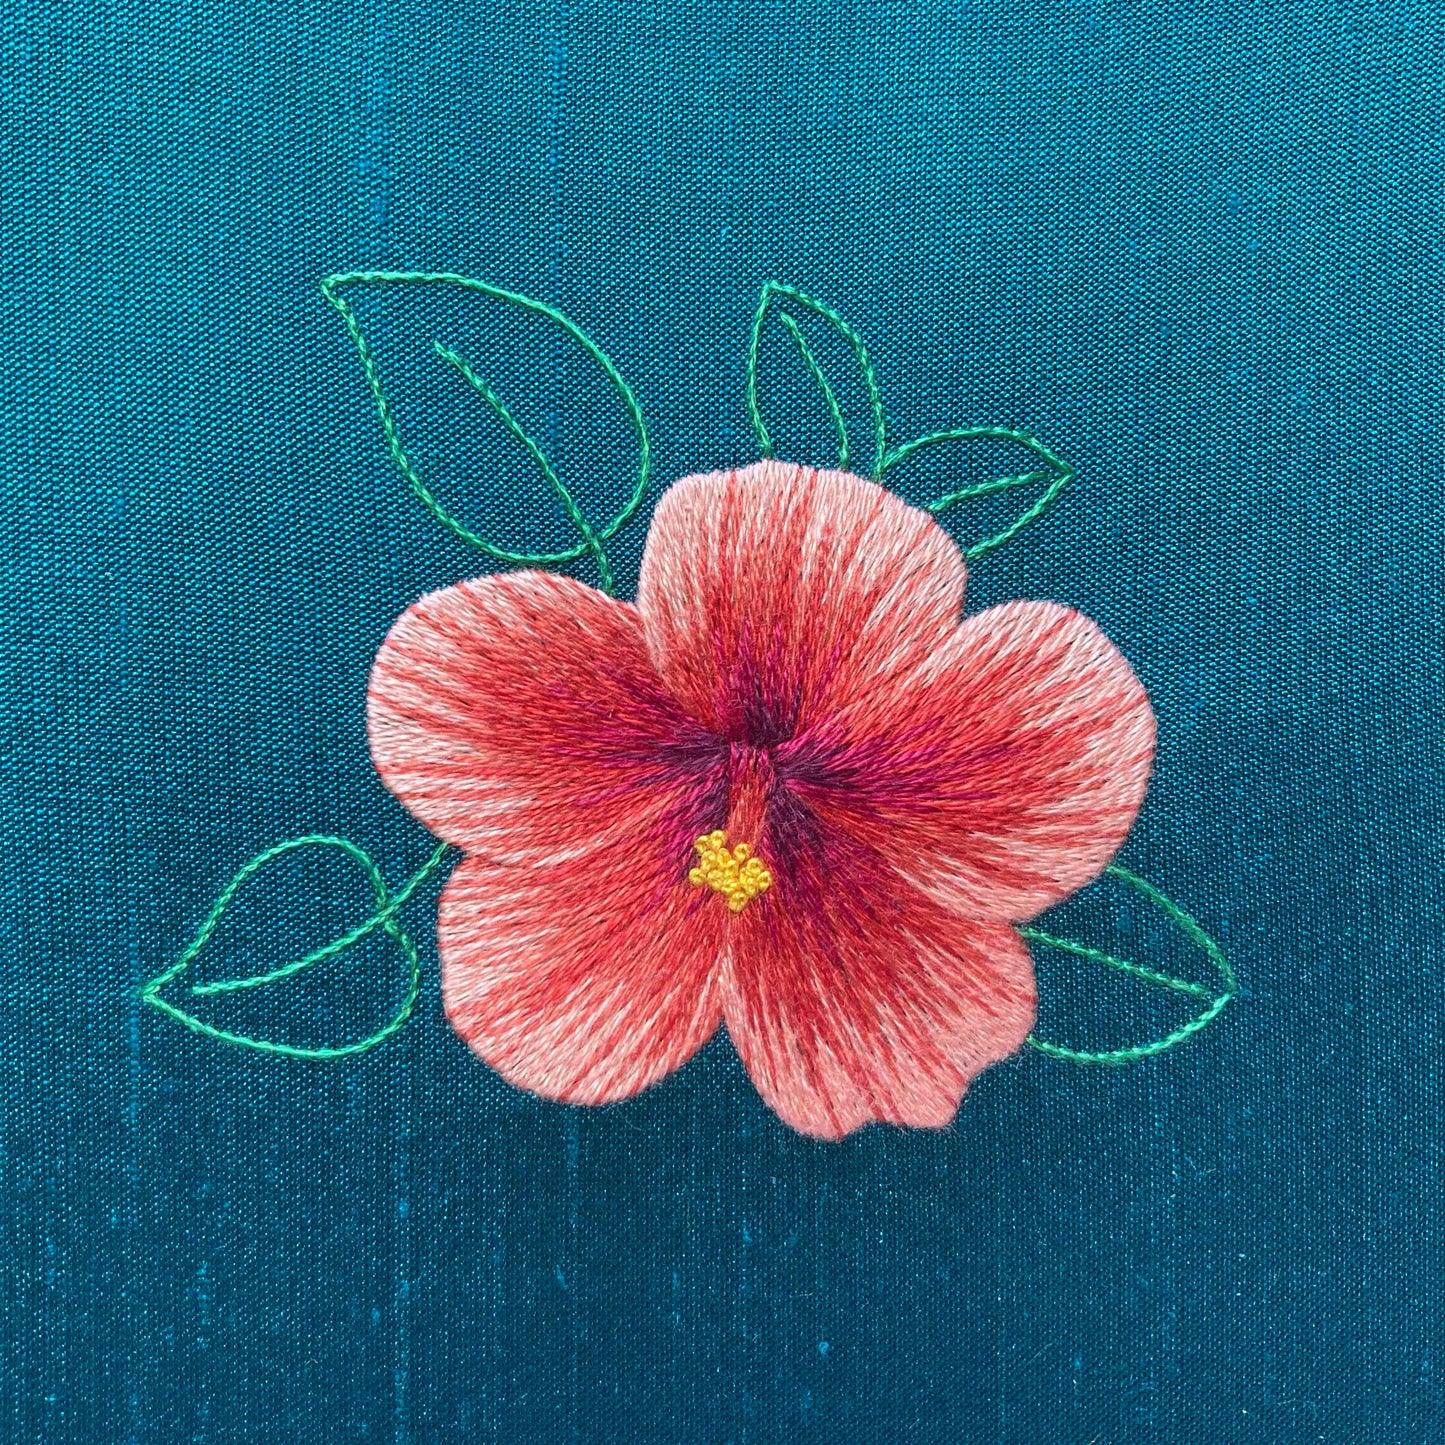 'Hibiscus' Silk Shading Embroidery Kit